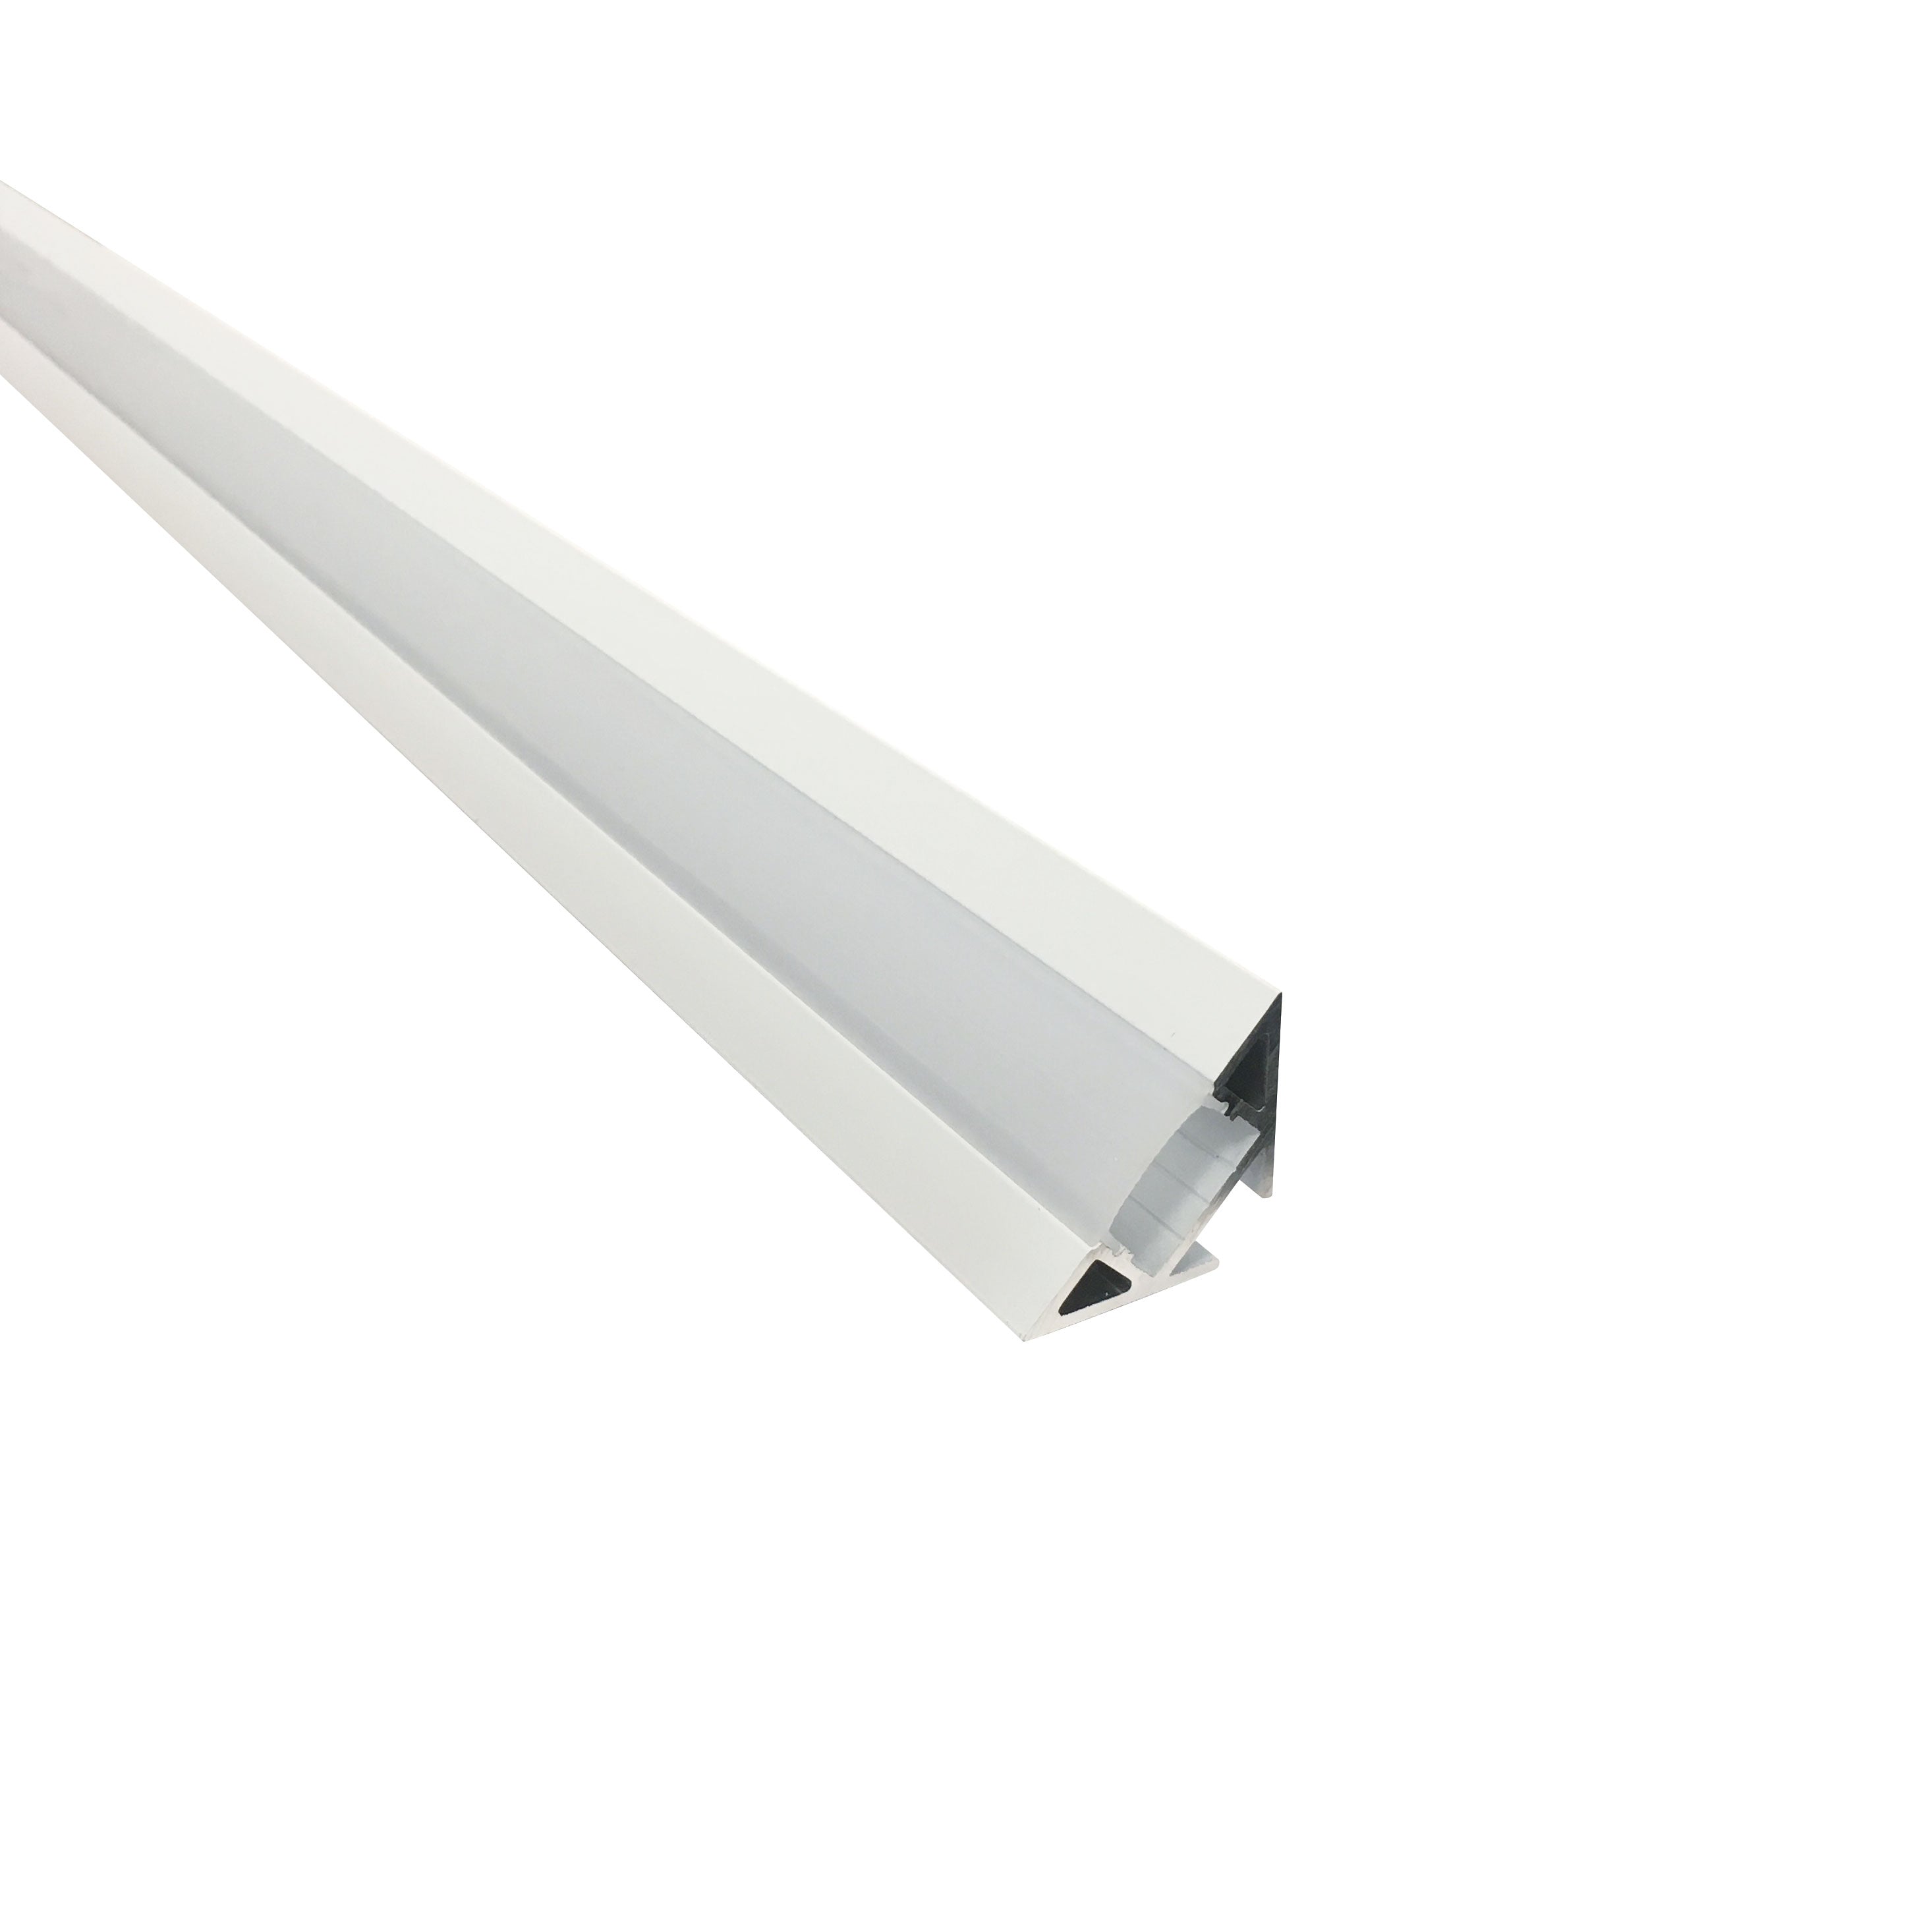 Nora Lighting NATL-C28W - Accent / Undercabinet - 4-ft Corner Channel, White (Plastic Diffuser and End Caps Included)